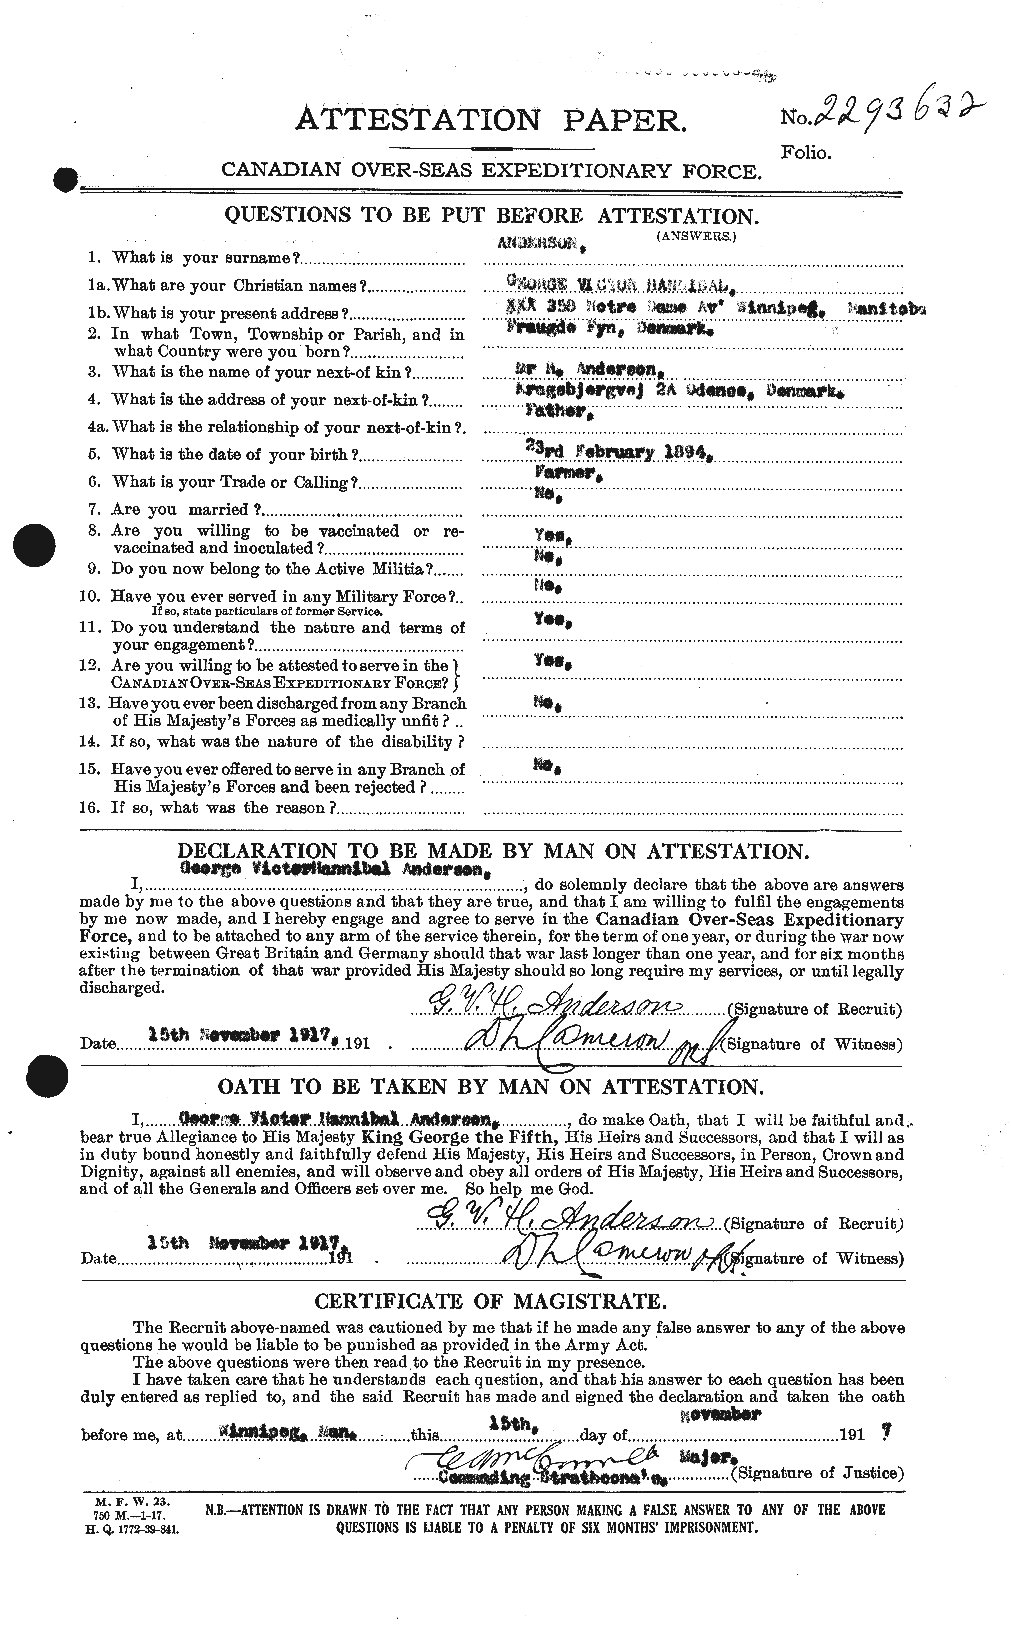 Personnel Records of the First World War - CEF 209694a